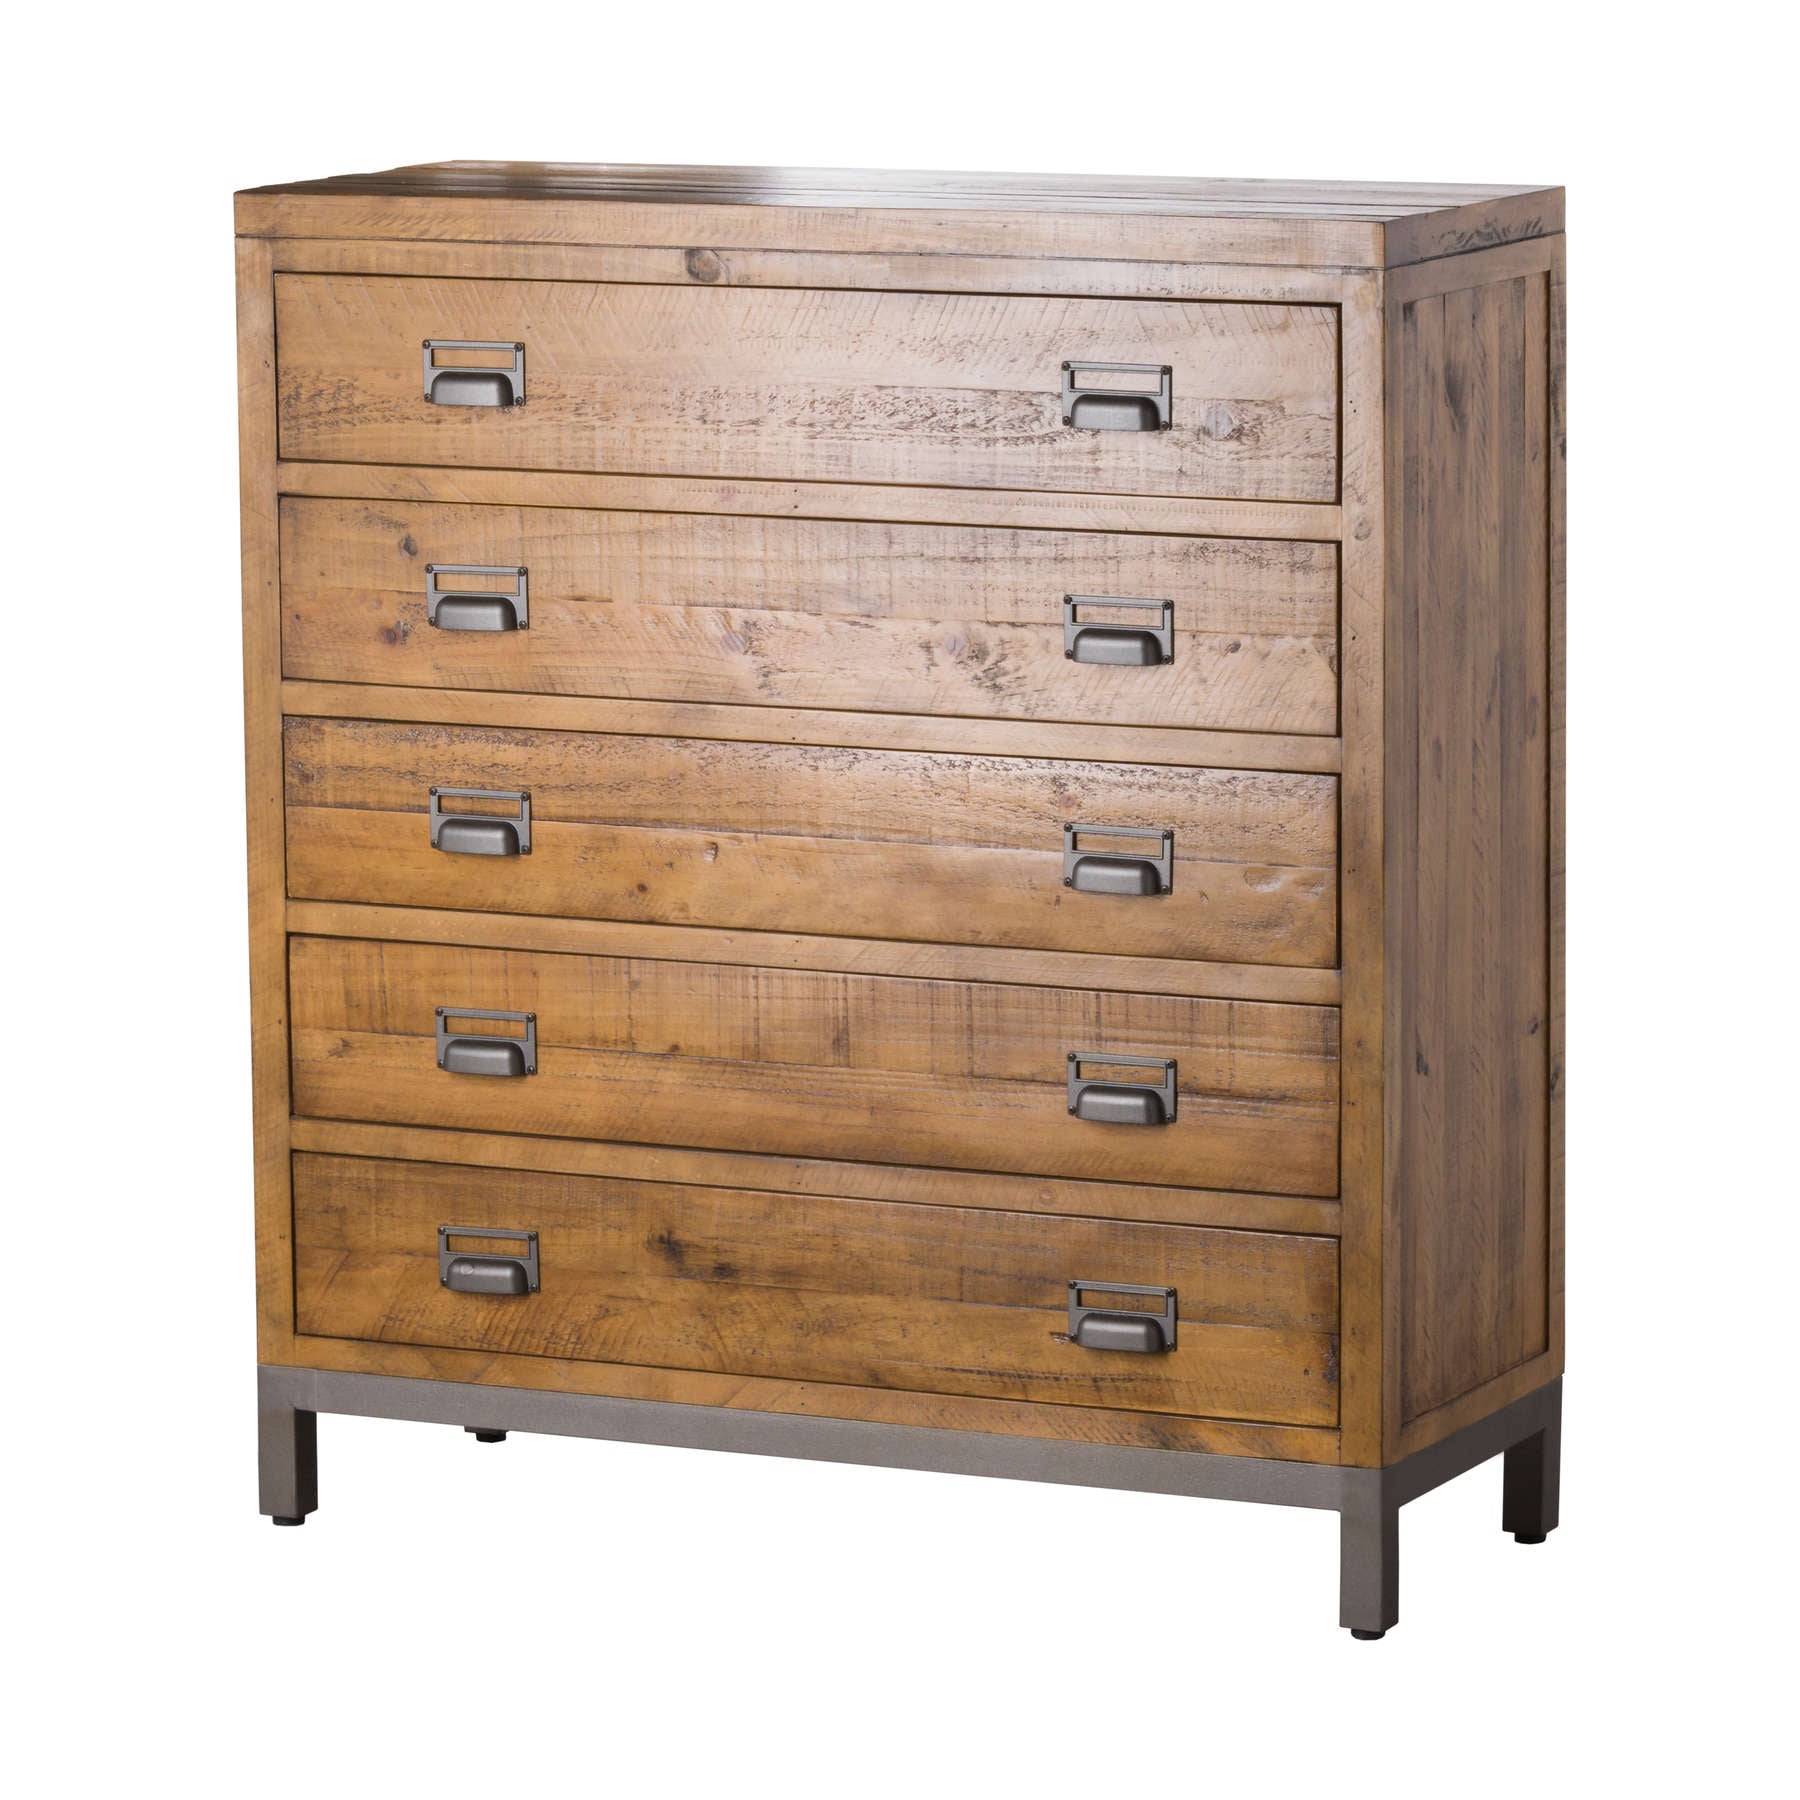 View The Draftsman Collection Five Drawer Chest information